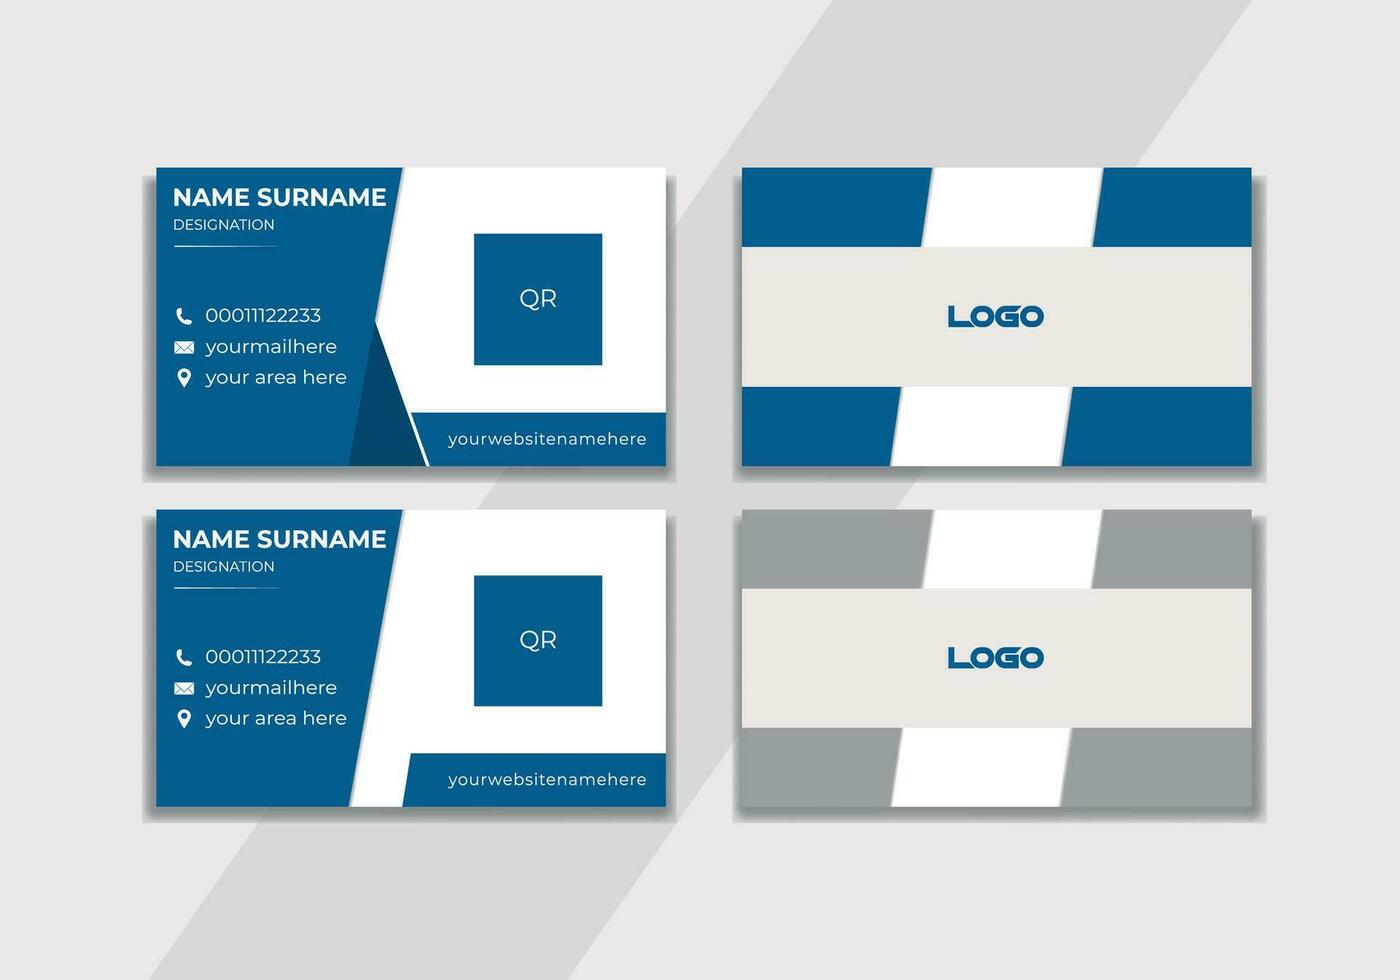 New creative business card template. double sided creative corporate business card layout. vector illustrator simple and unique corporate business card design. QR code .